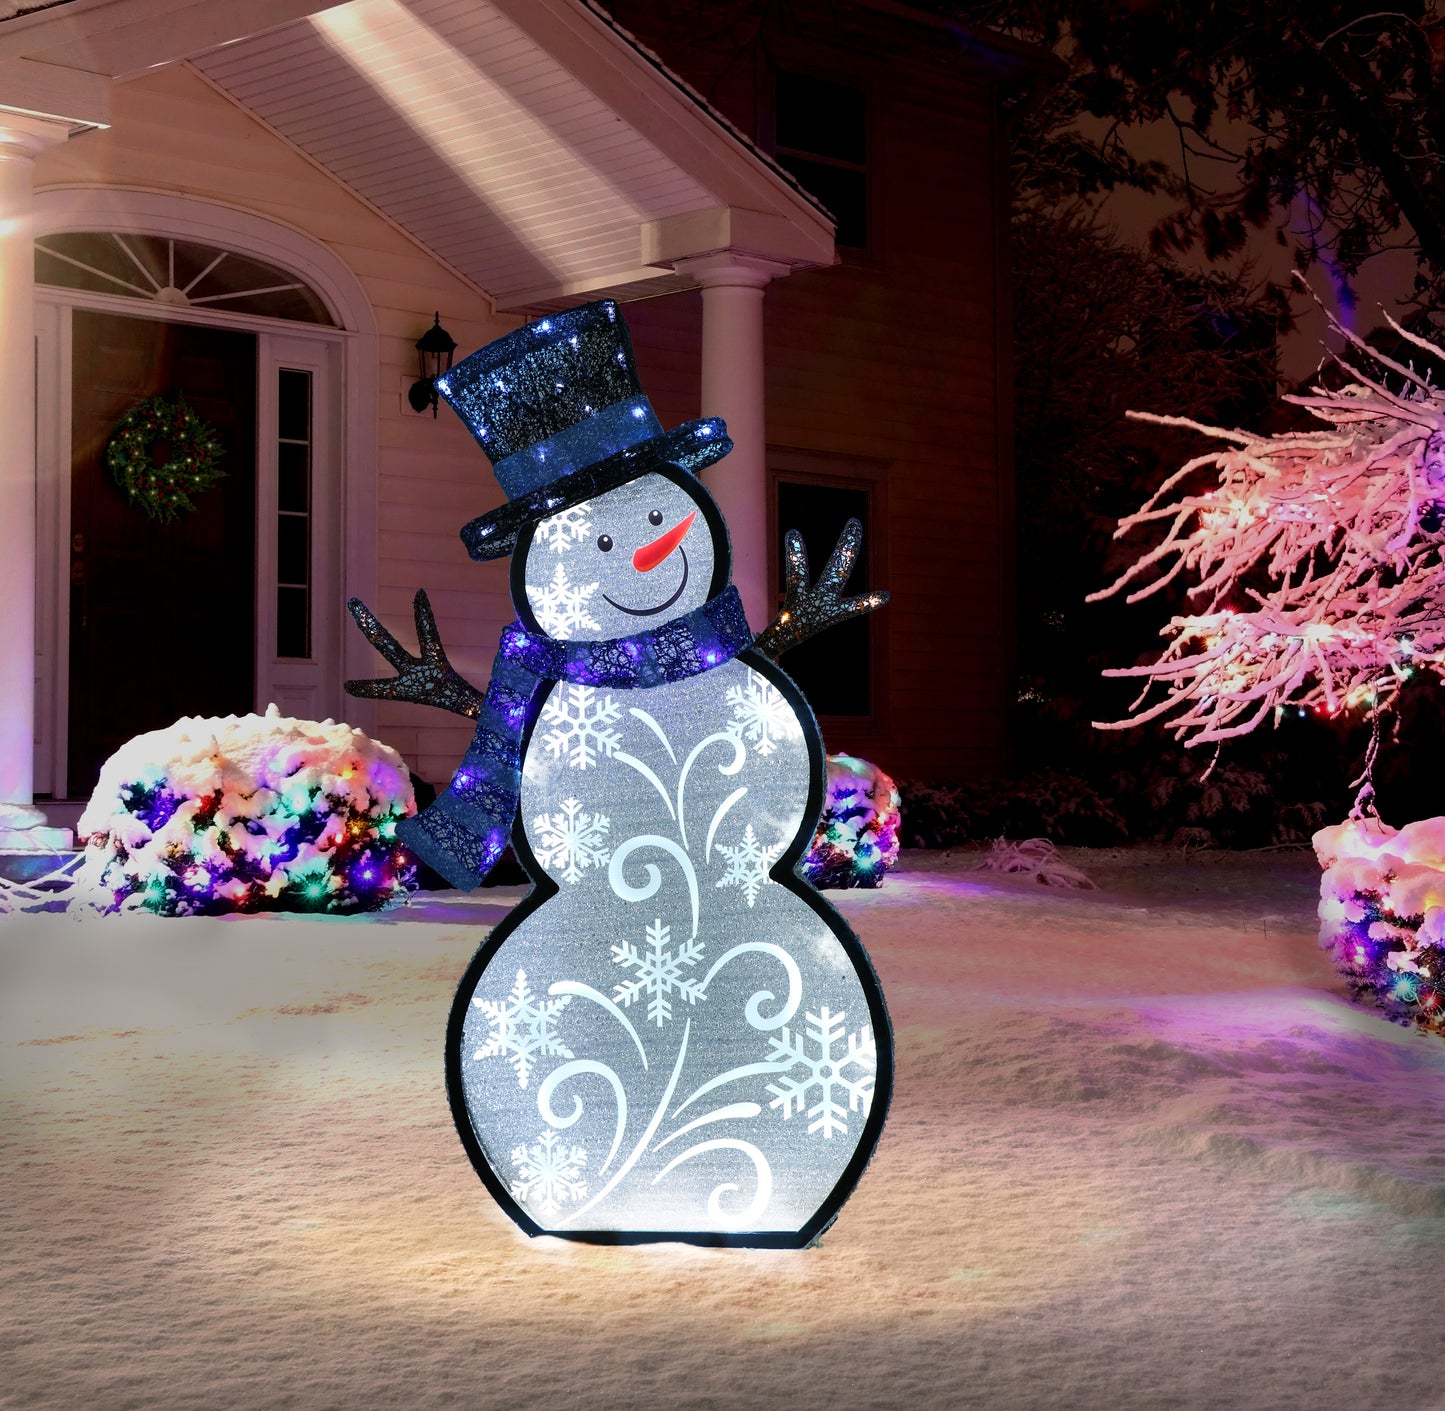 30" Lighted Outdoor Snowman with 137 LED Lights, White/Blue/Black